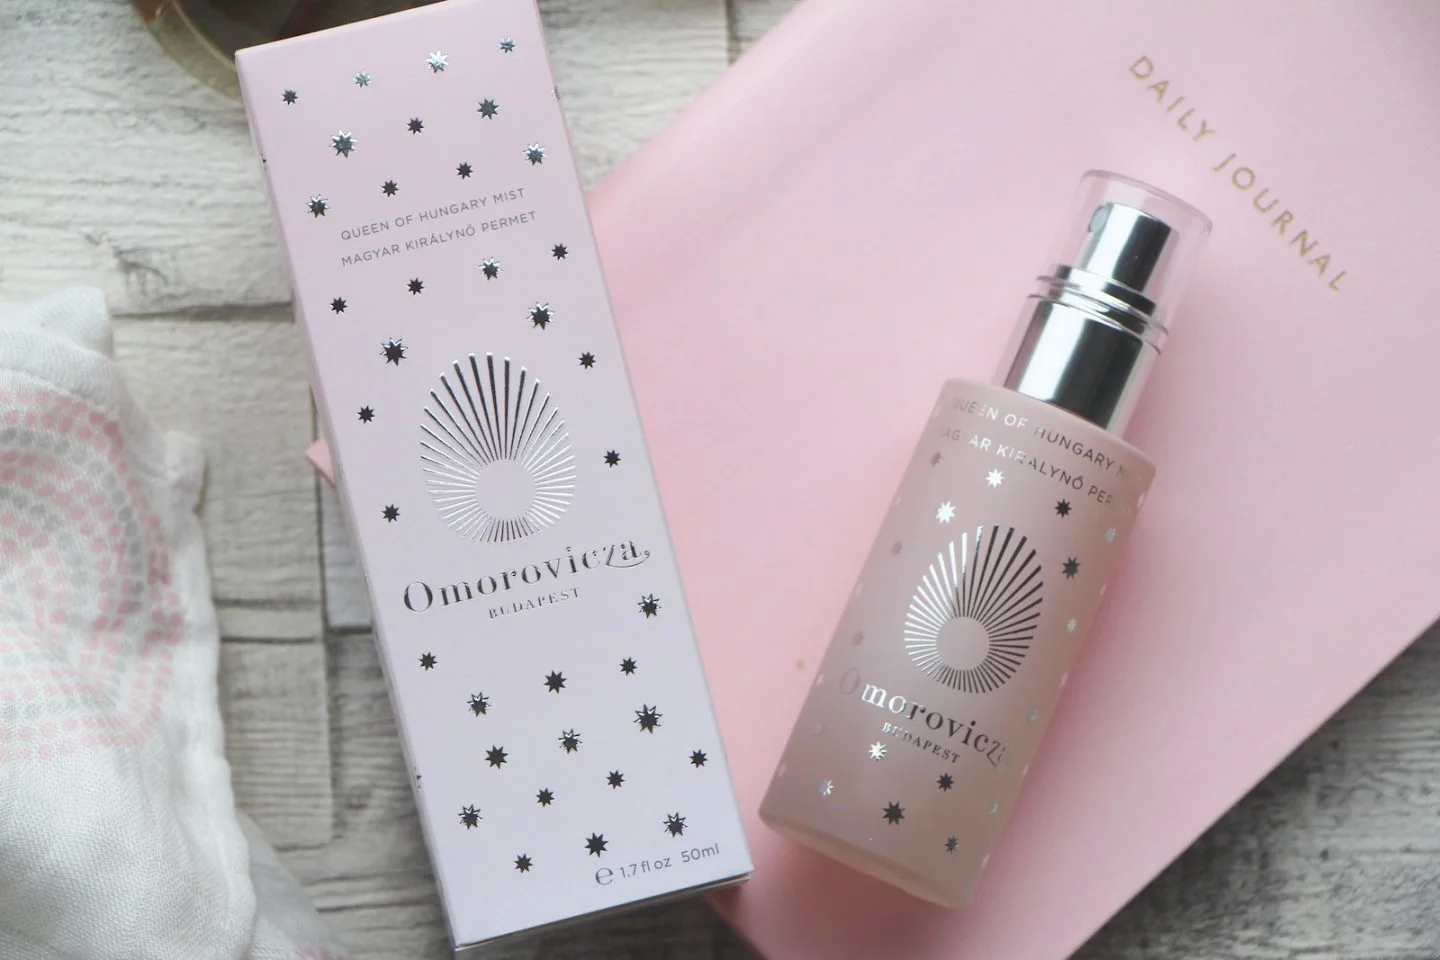 Omorovicza Limited Edition Queen of Hungary Mist